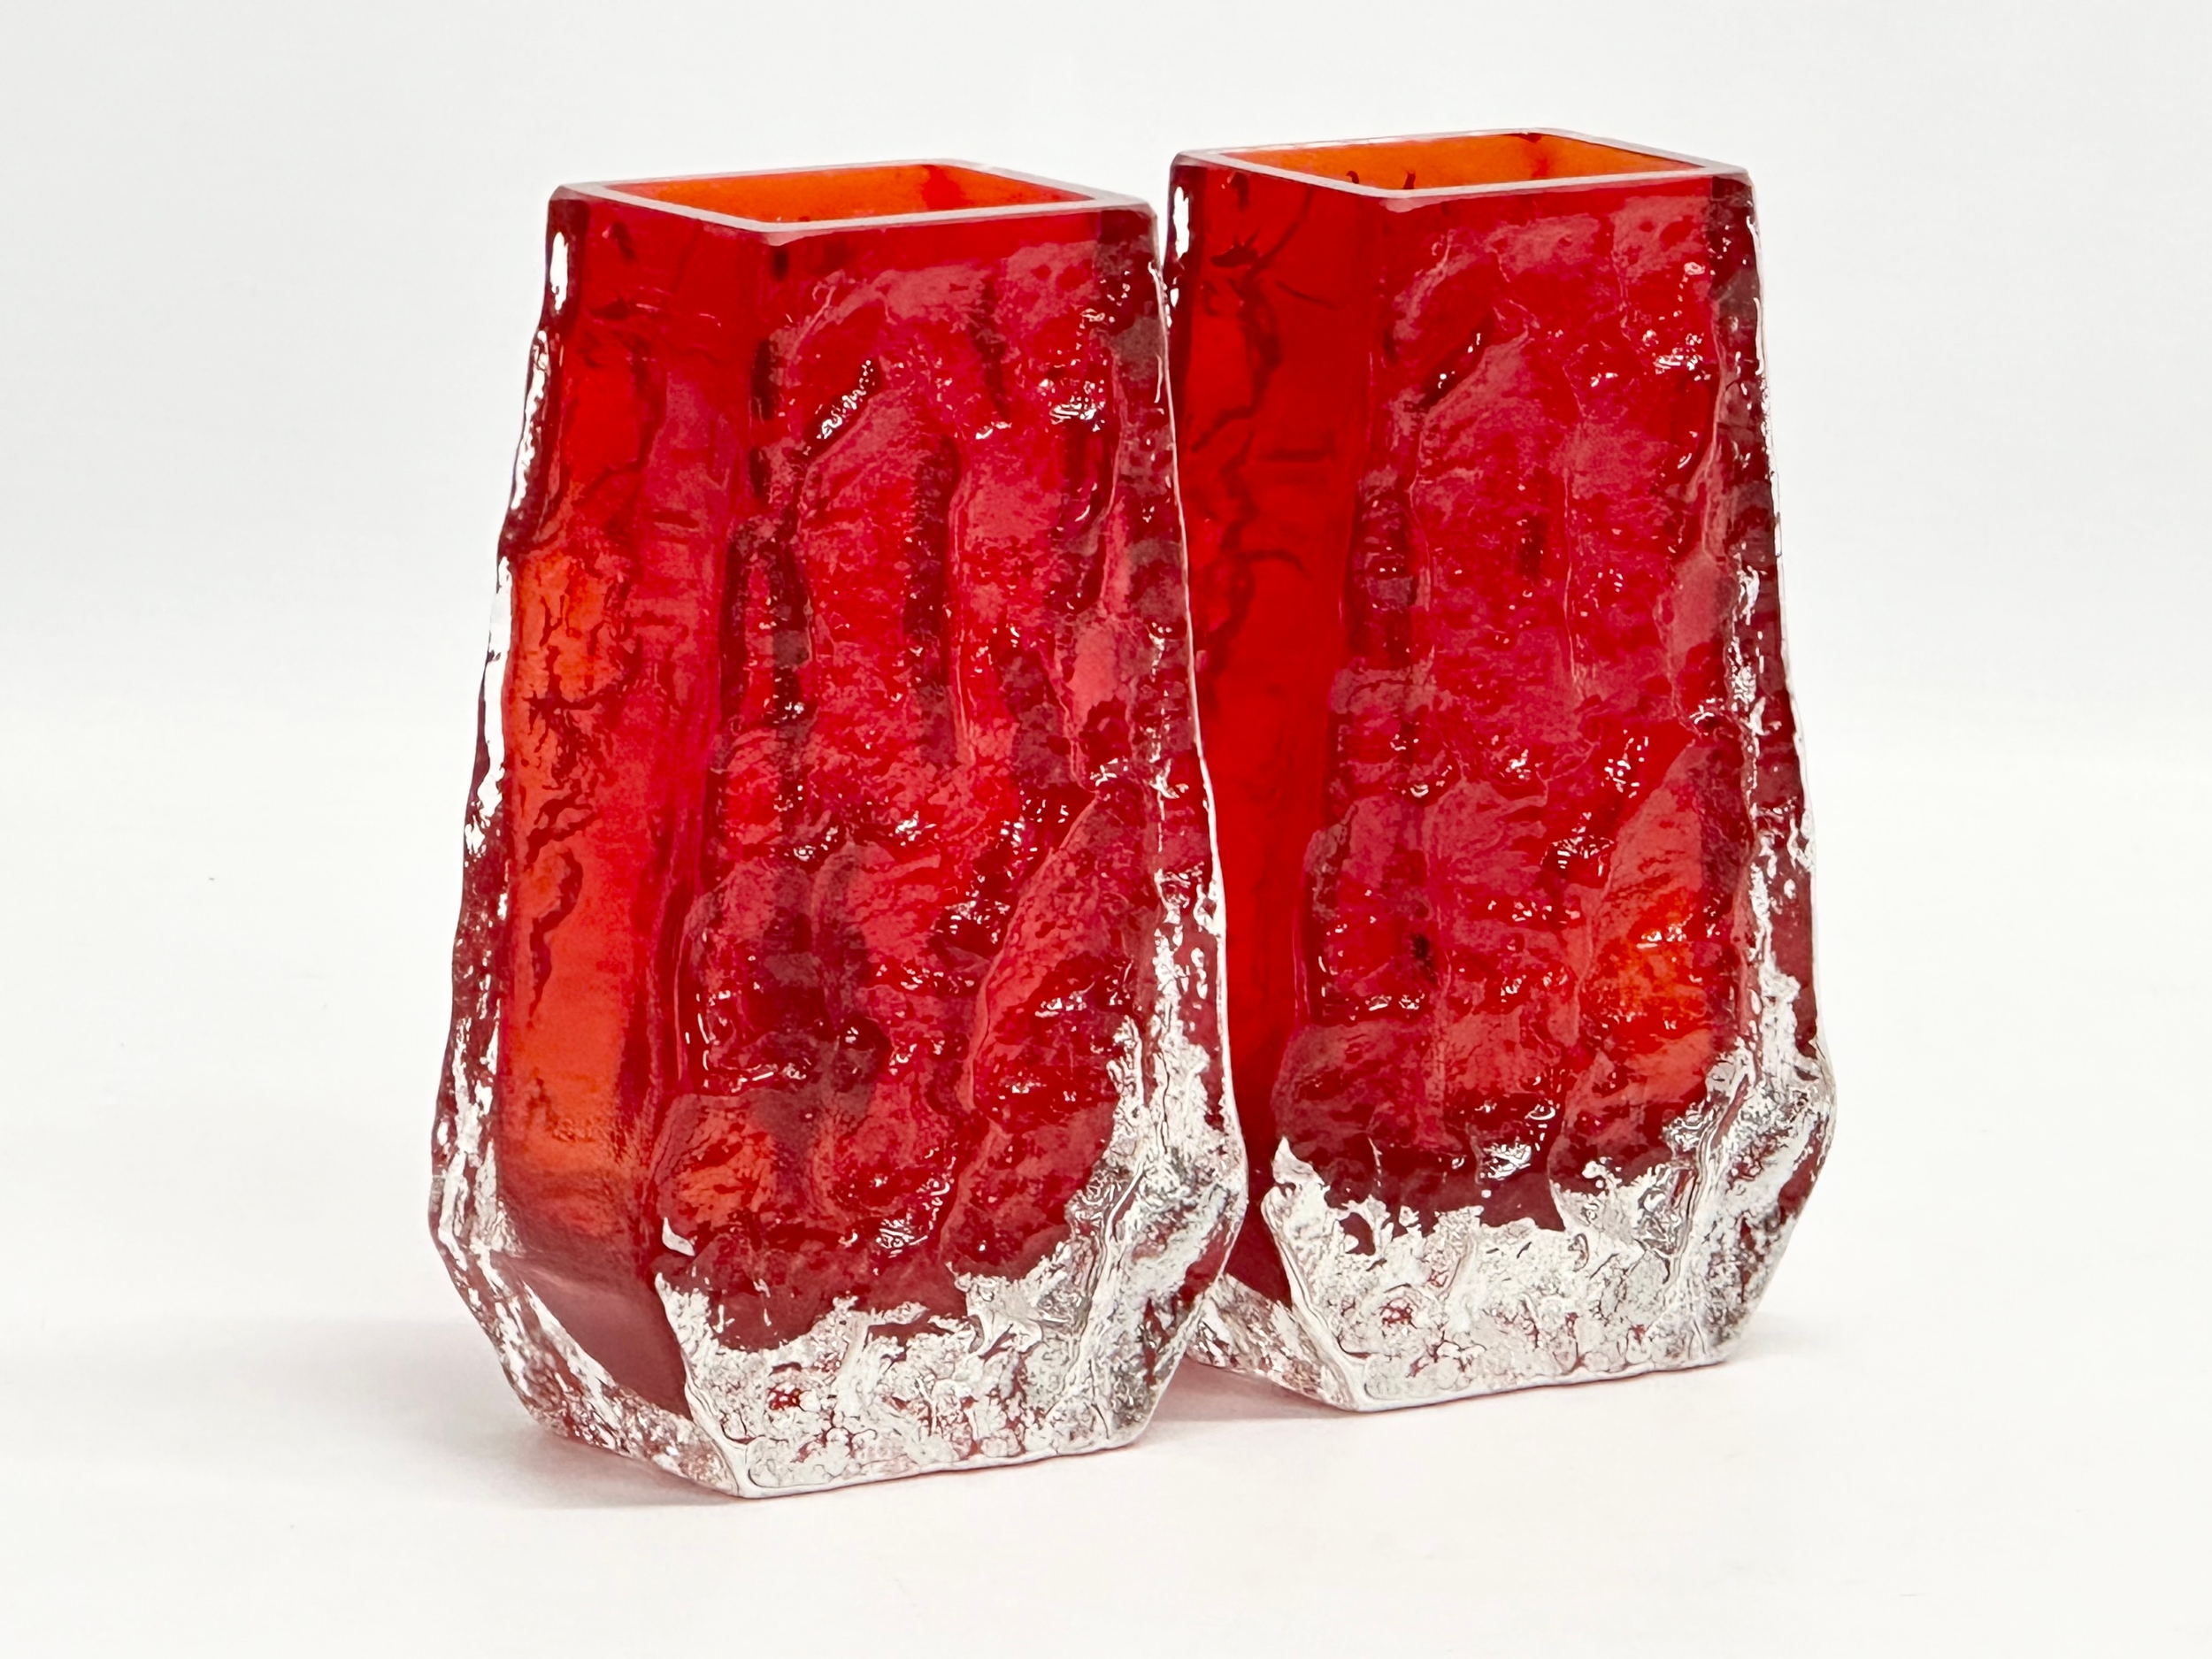 A pair of Textured Bark ‘Coffin’ vases designed by Geoffrey Baxter for Whitefriars. 8x5x13cm - Image 3 of 5